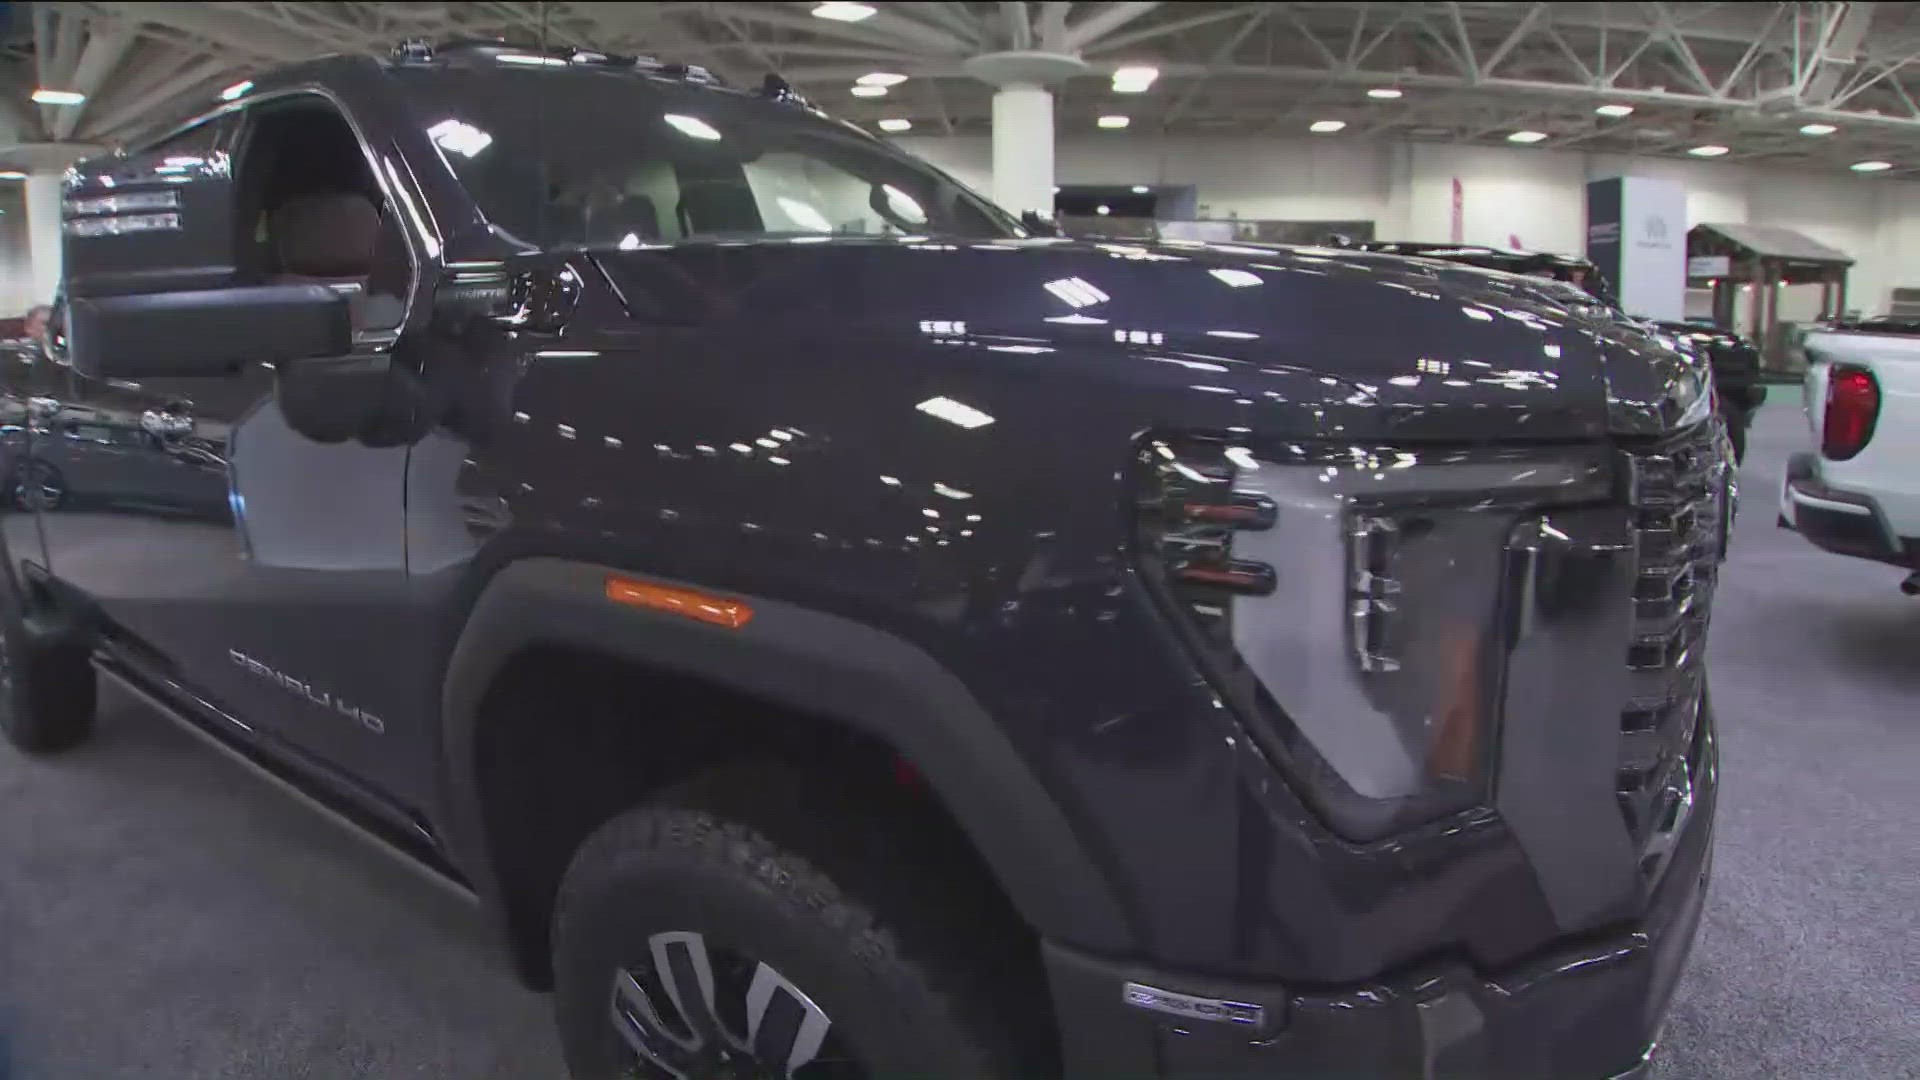 The 50th annual Twin Cities Auto Show is at the Minneapolis Convention Center from March 31 through April 8.